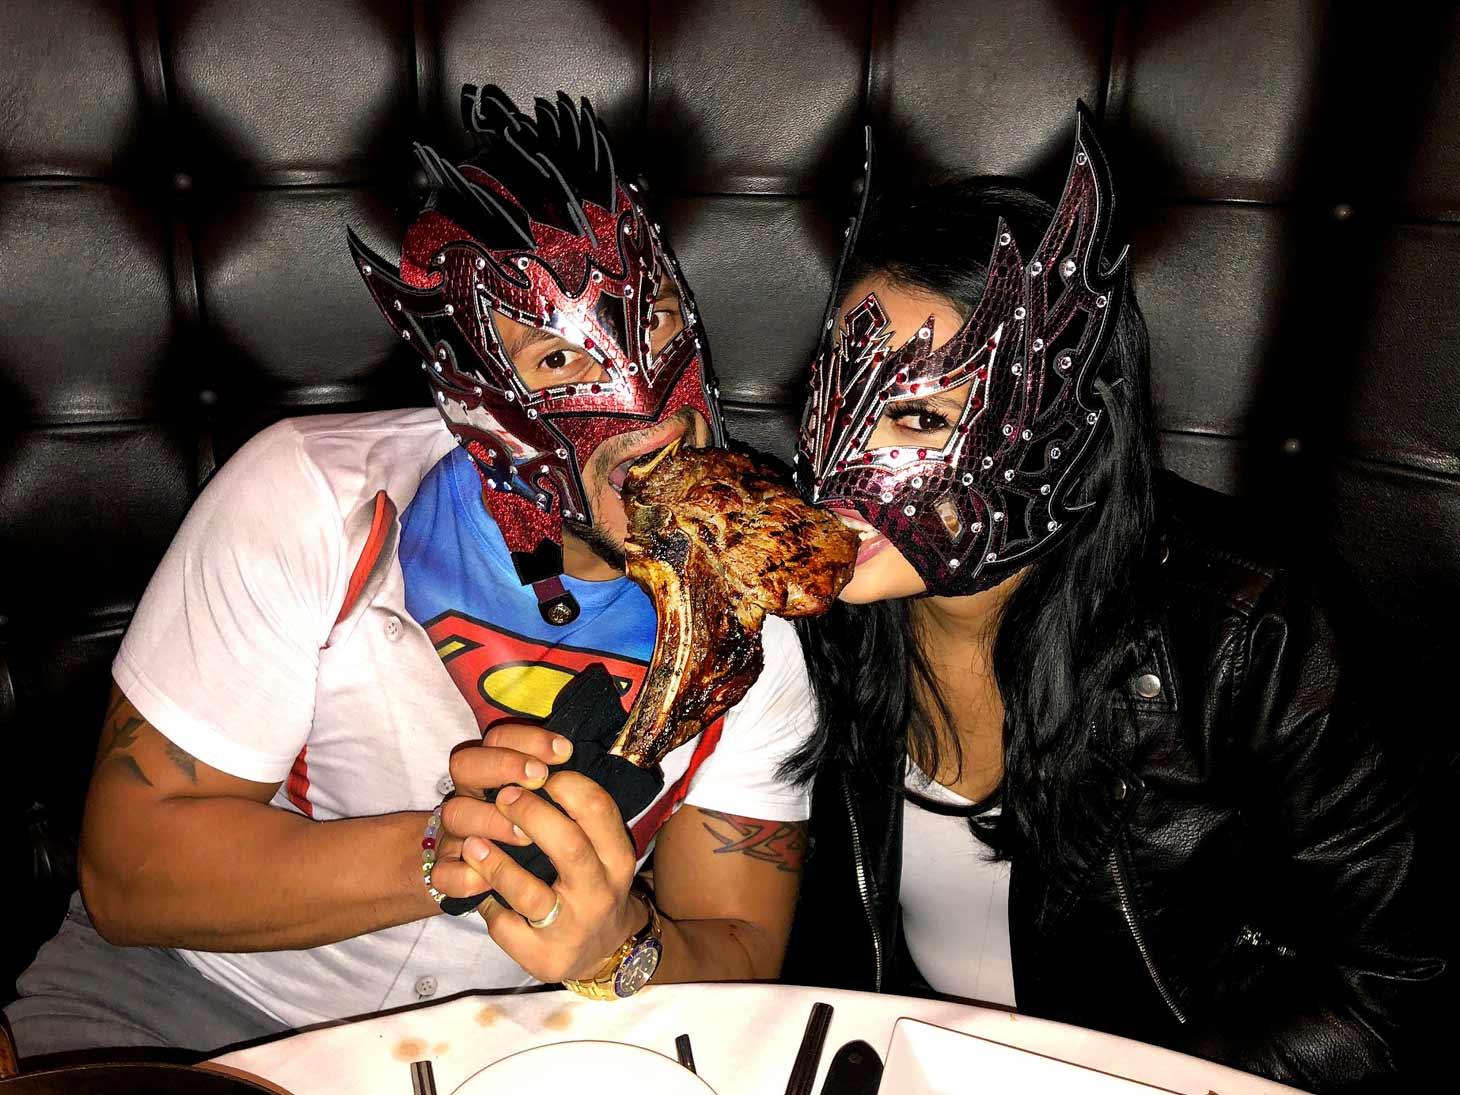 WWE Luchador Star Kalisto & Wife Can’t Mask Their Love While Tag-Teaming Steak Dinner